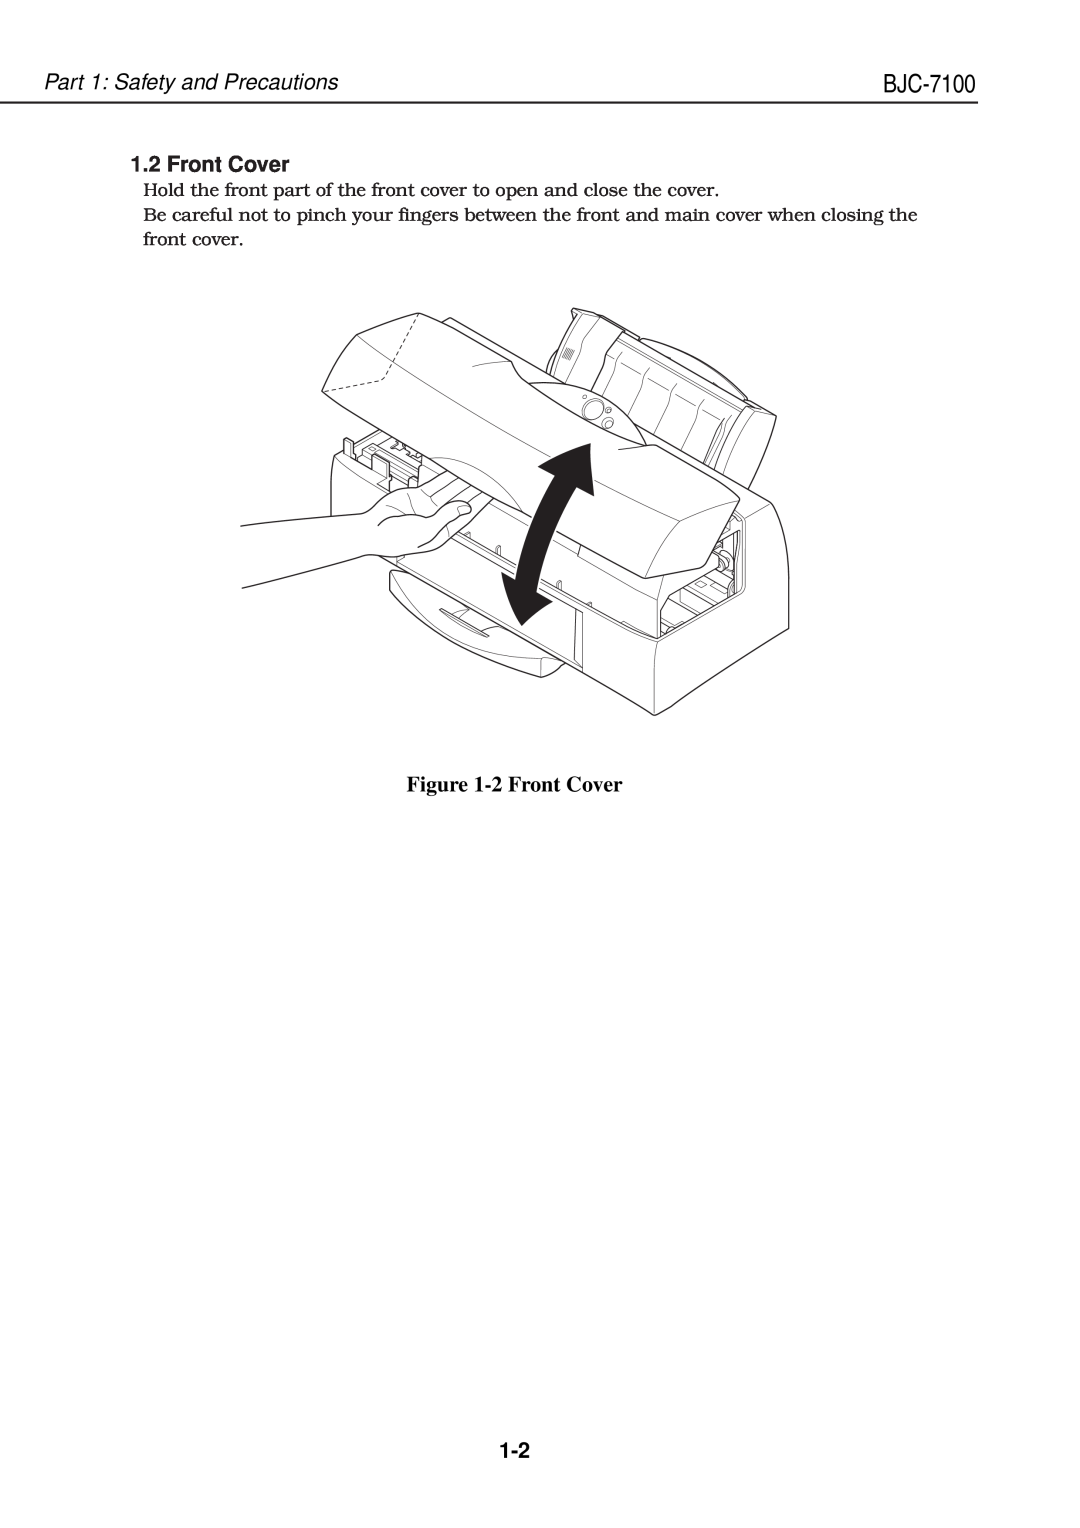 Canon QY8-1360-000 manual 2 Front Cover, BJC-7100, Part 1 Safety and Precautions 